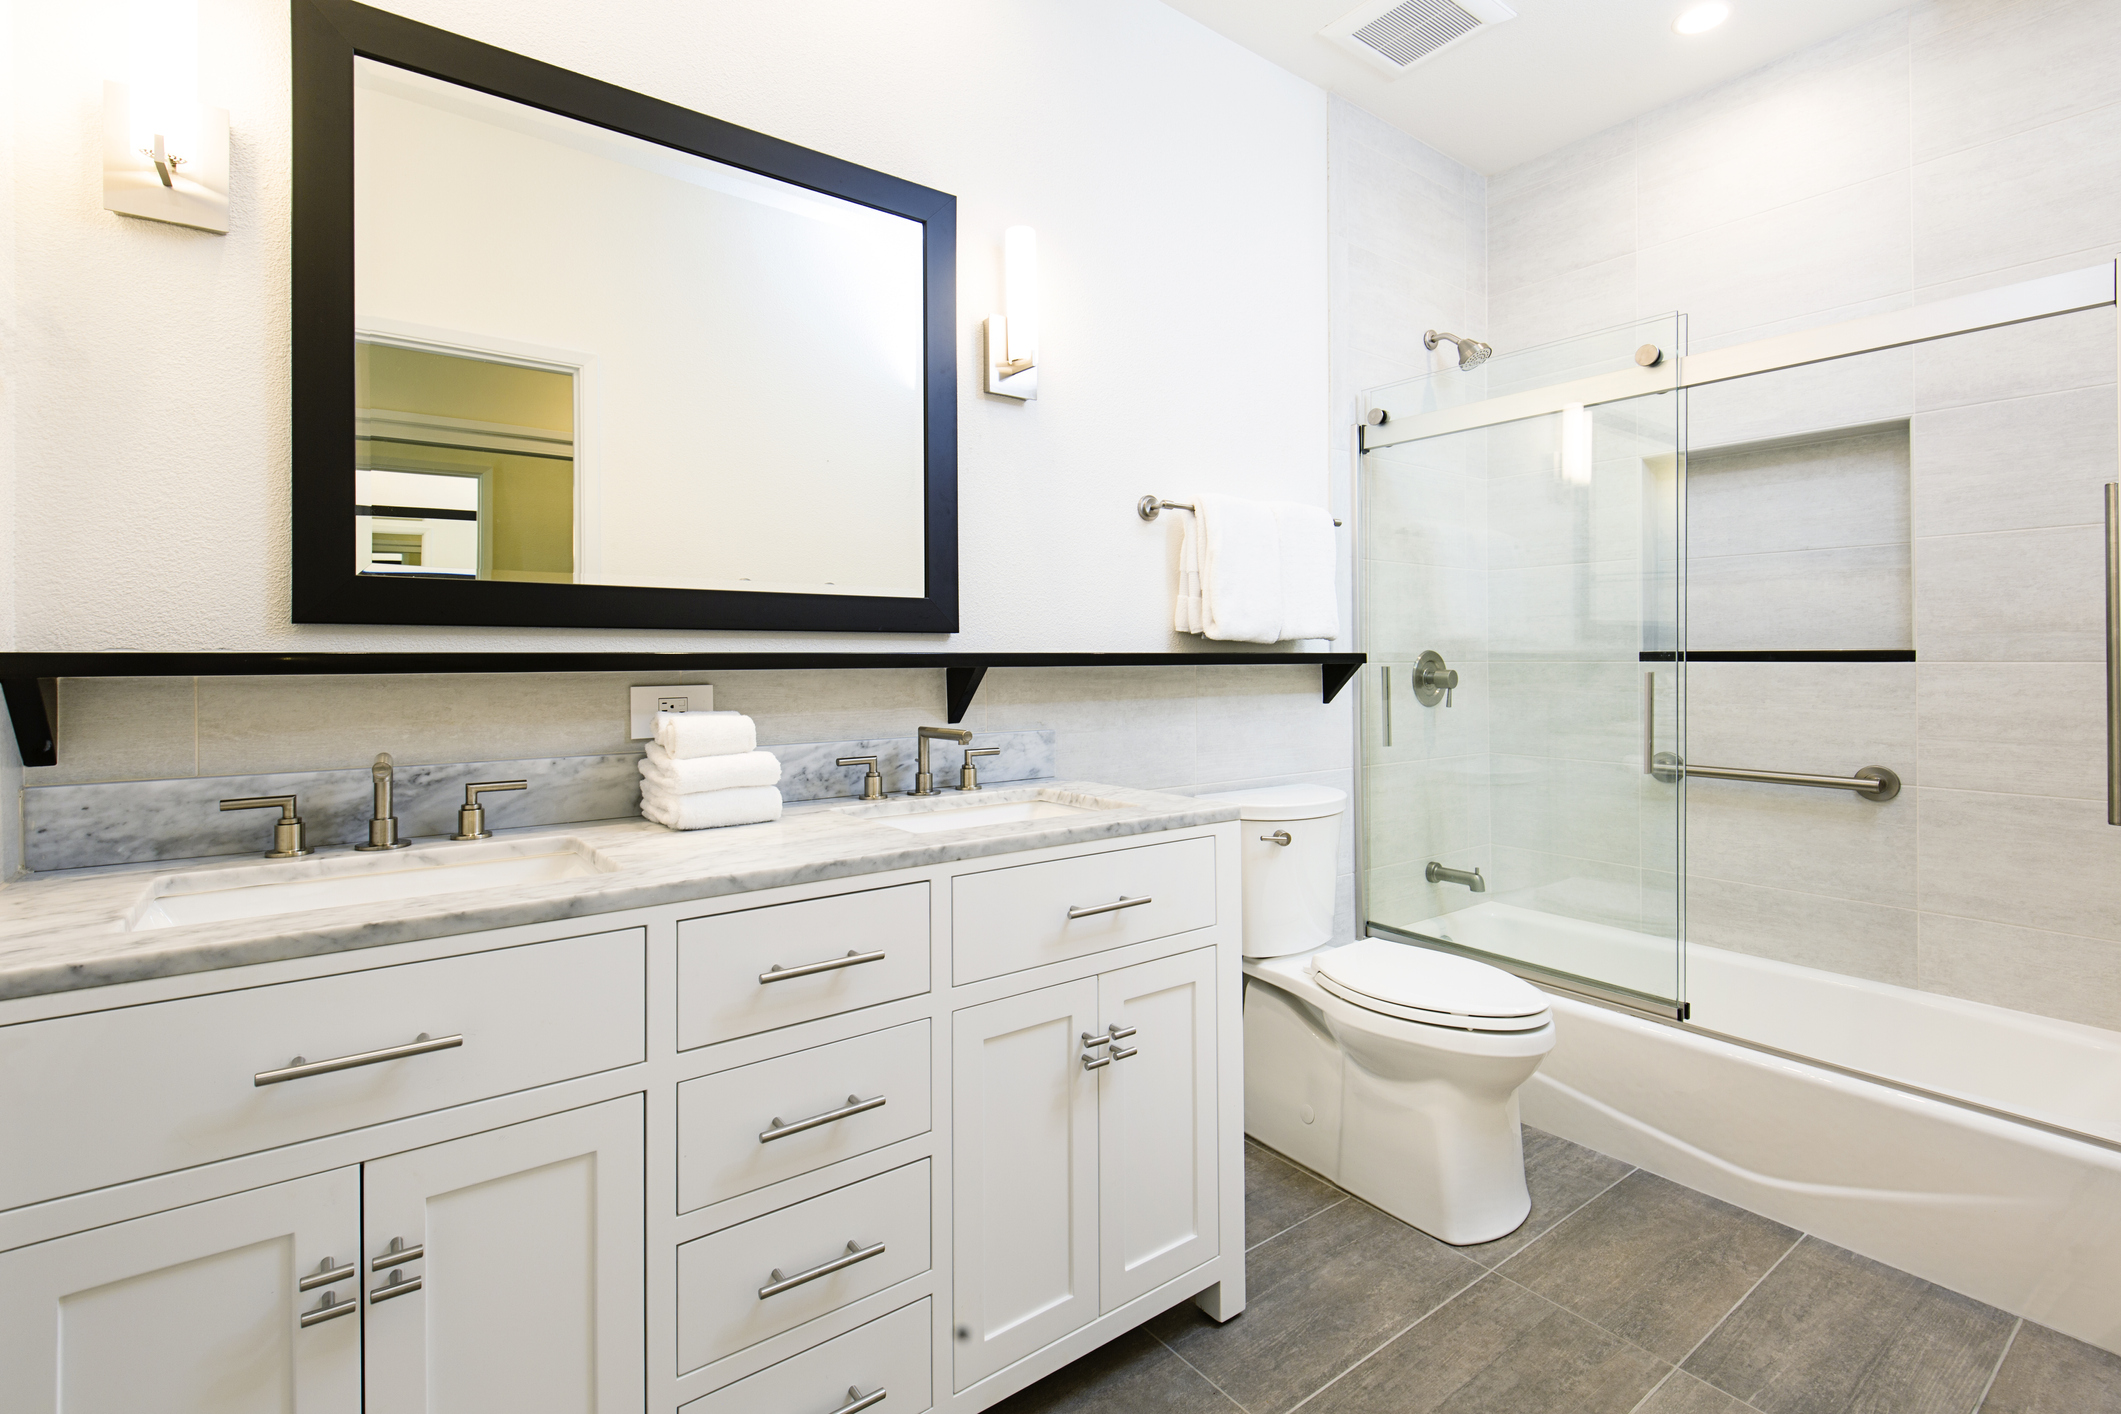 How Much Does A Bathroom Remodel Cost, Can You Remodel A Bathroom For 2000